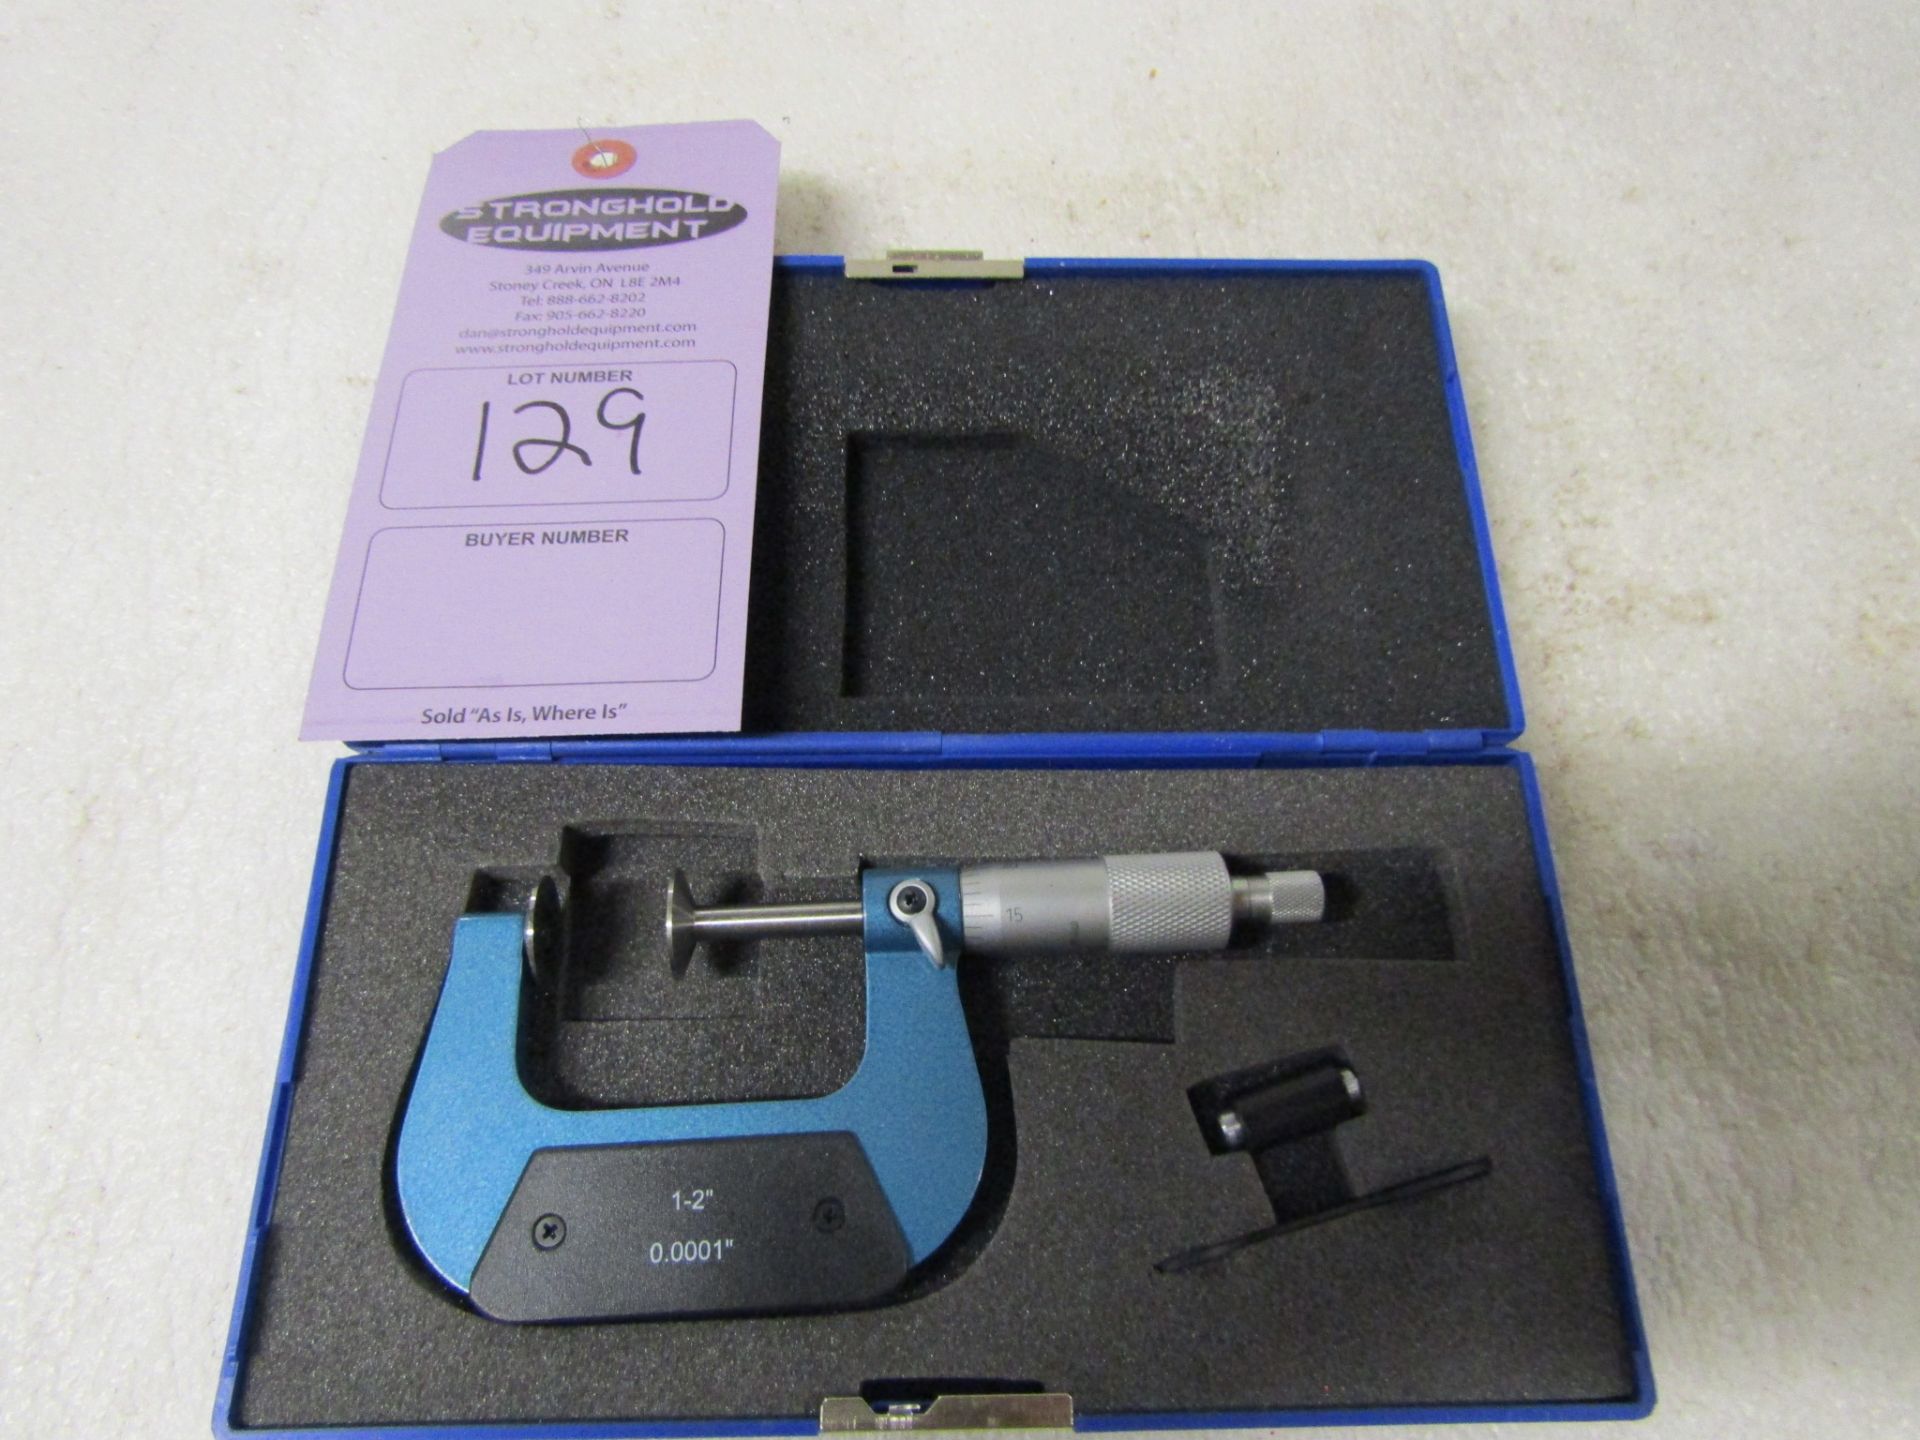 Disc Micrometer unit 1-2" range with 0.0001" accuracy with standard calibration rod in case